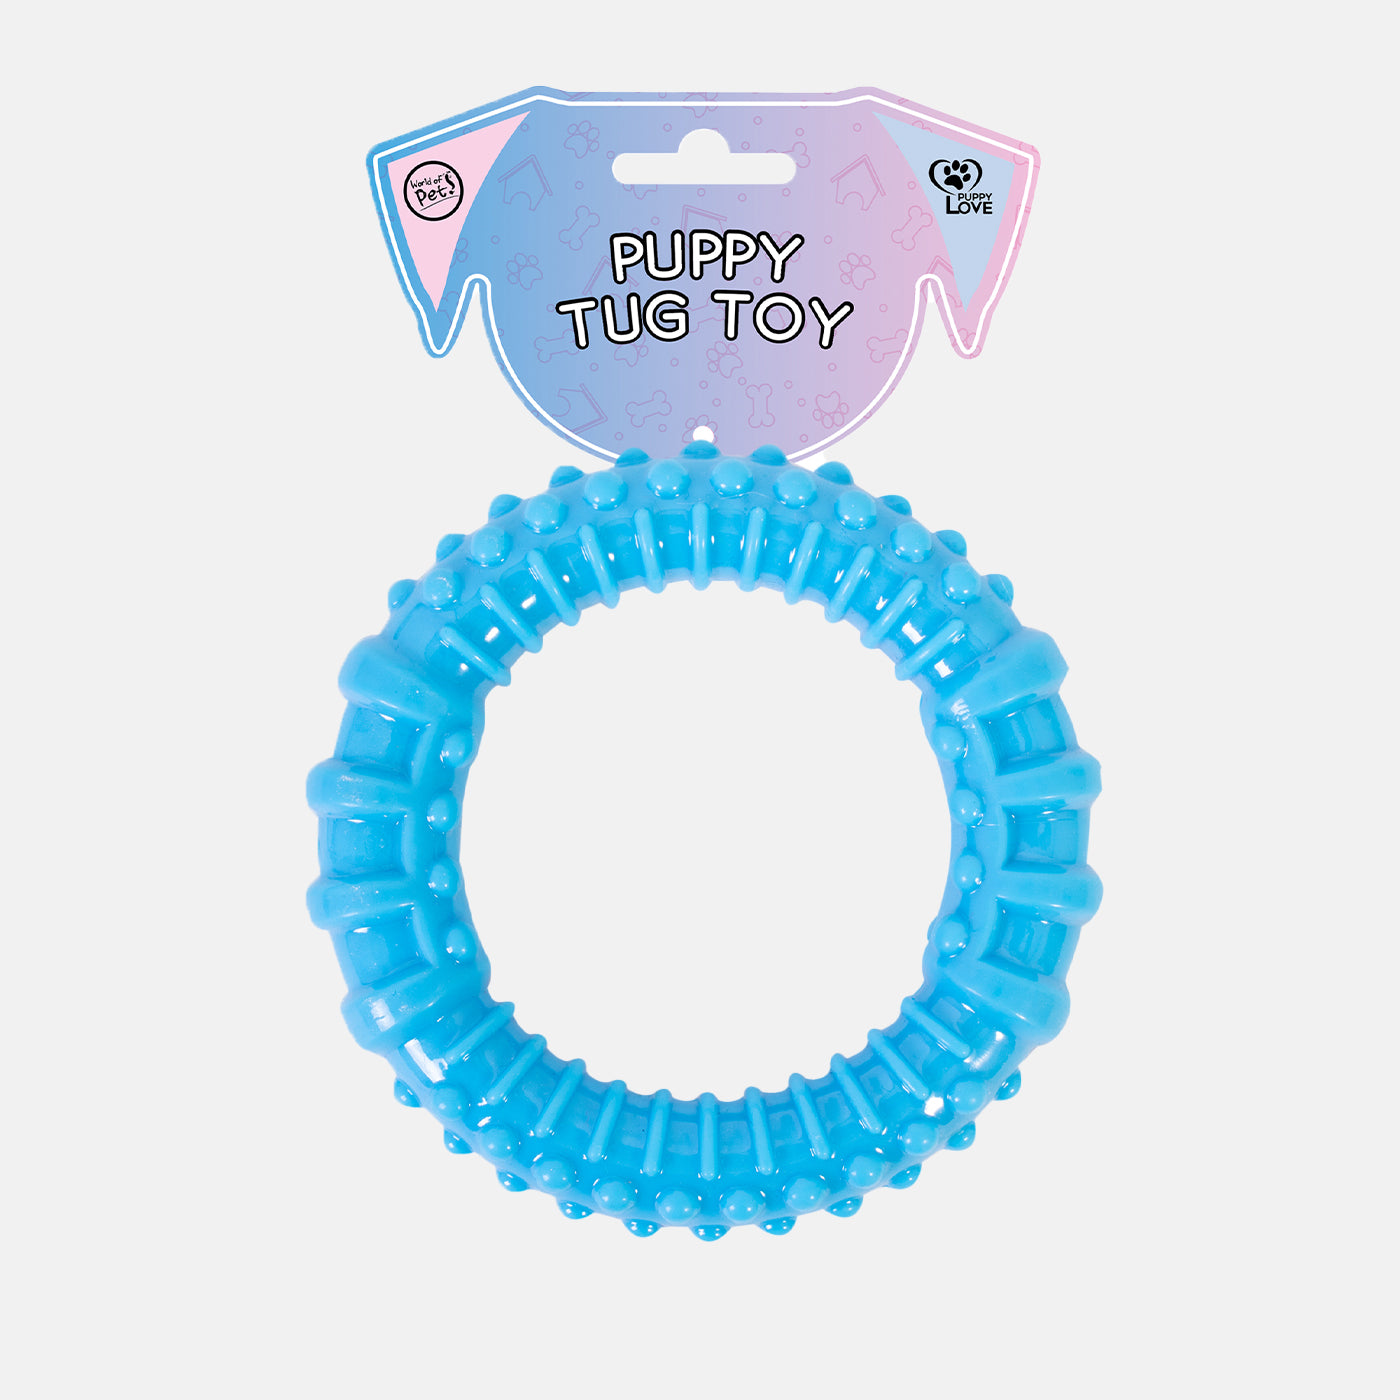 Small Dog & Puppy Rubber Ring Toy